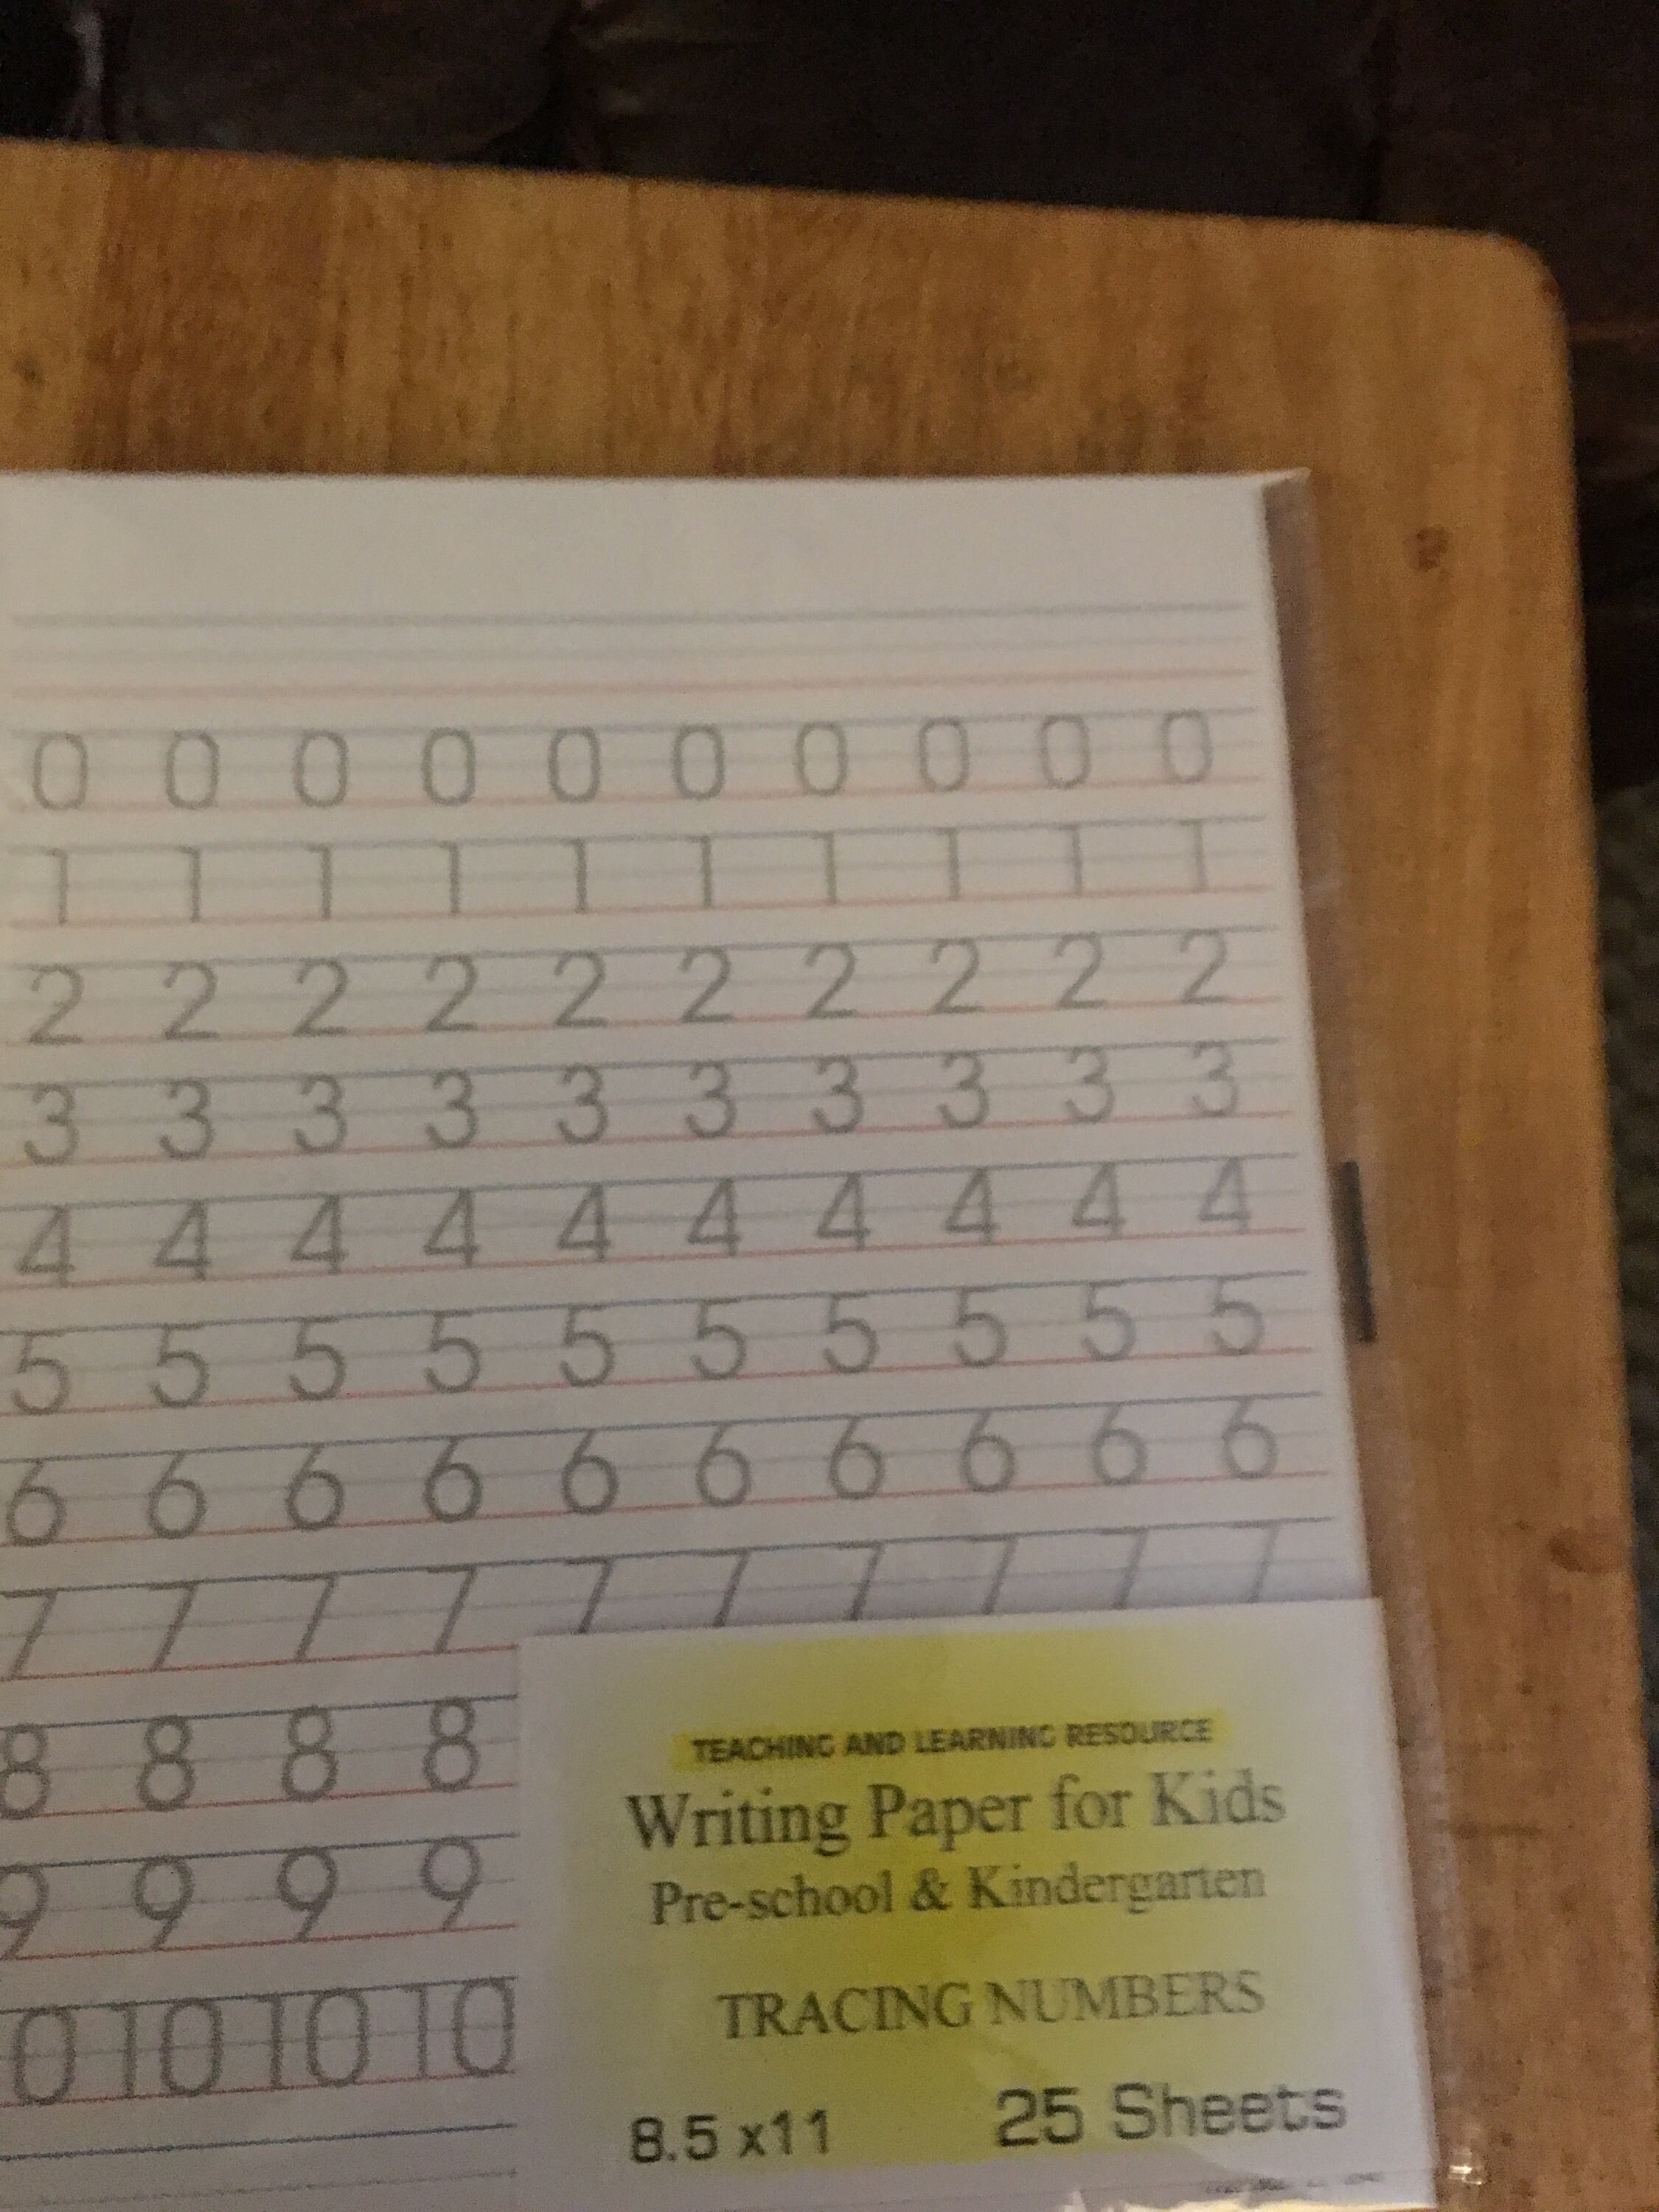 Writing Paper for Kids Tracing Numbers 11 X 8.5 In, 20 Lb, 25 Sheets 